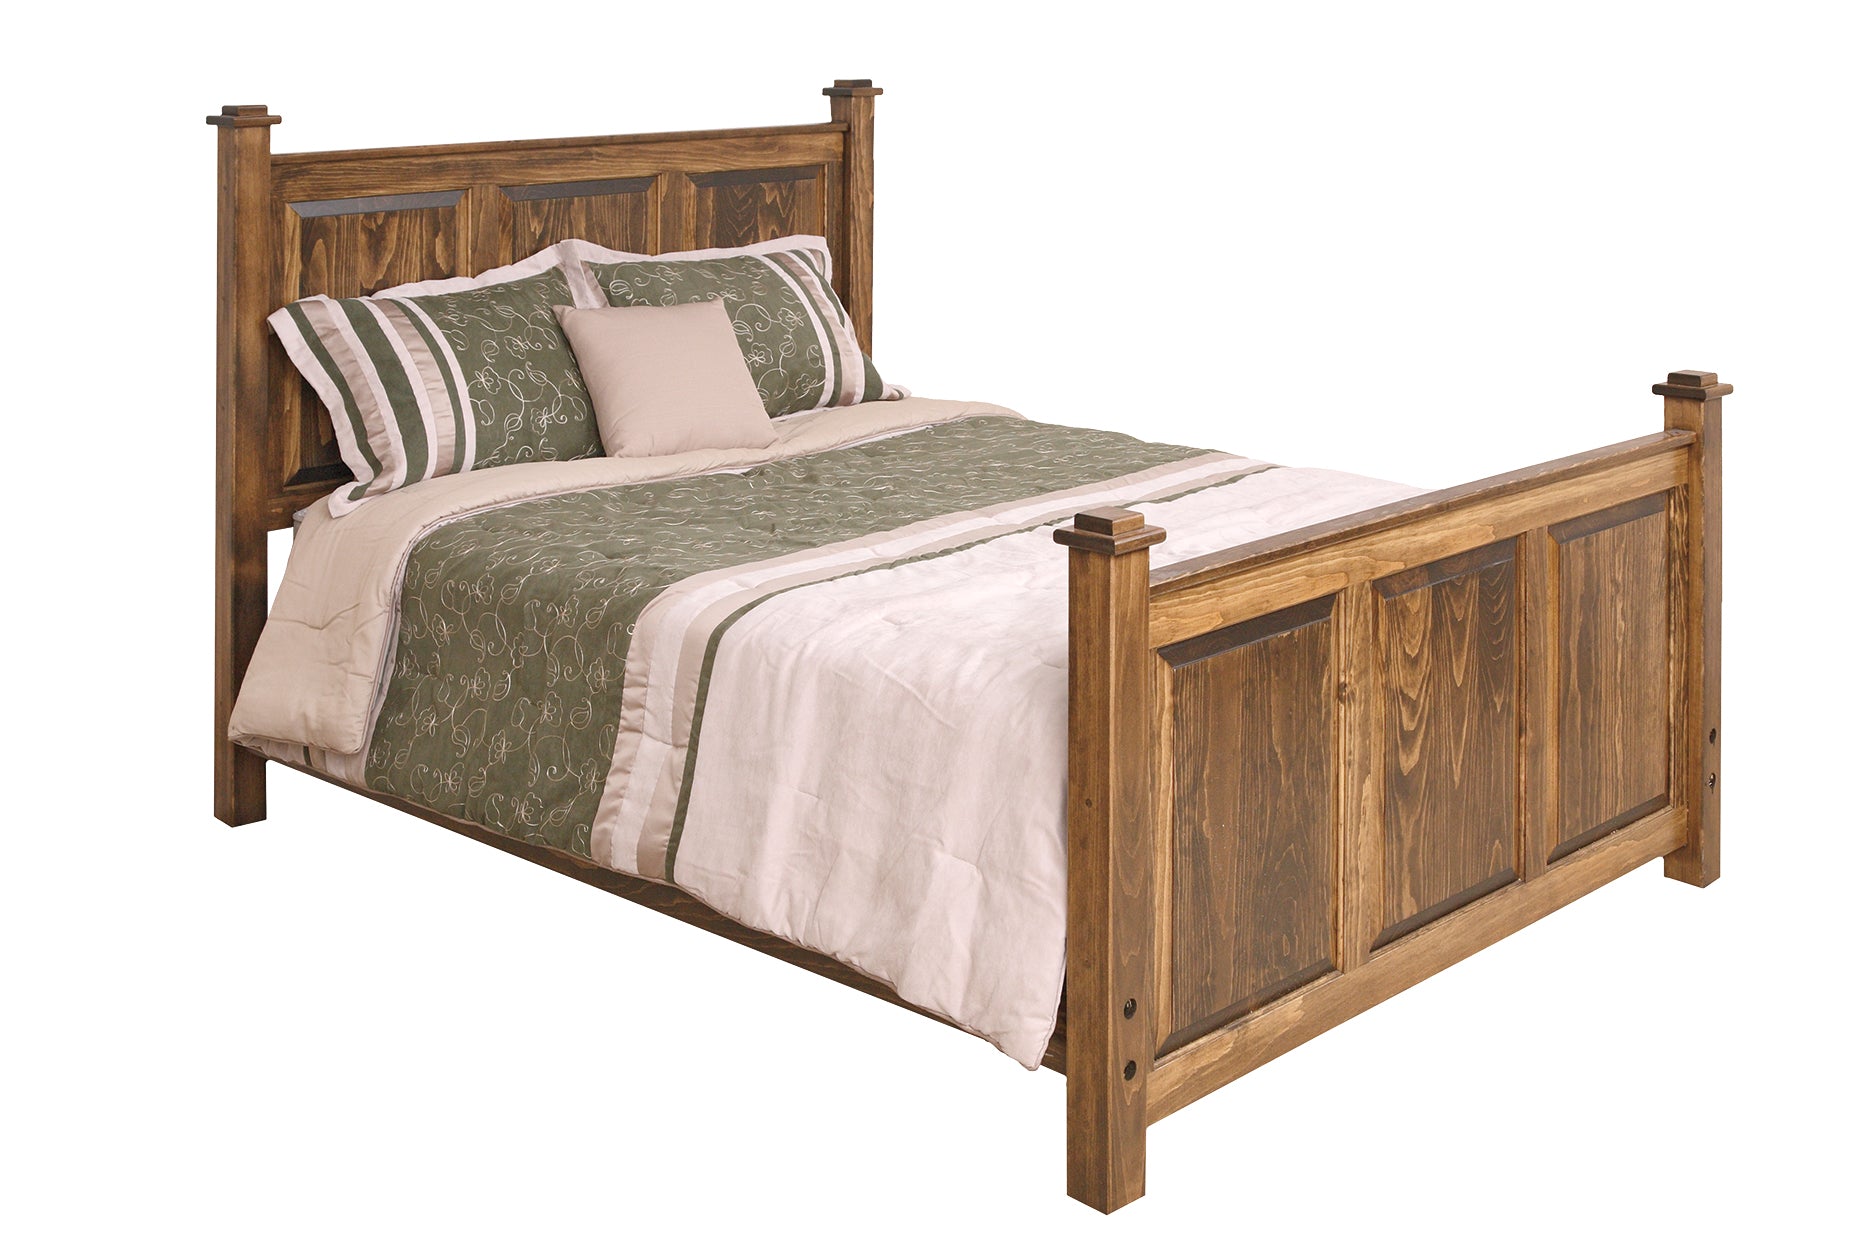 Amish Shaker Style Solid Wood Bed - The Wood Reserve